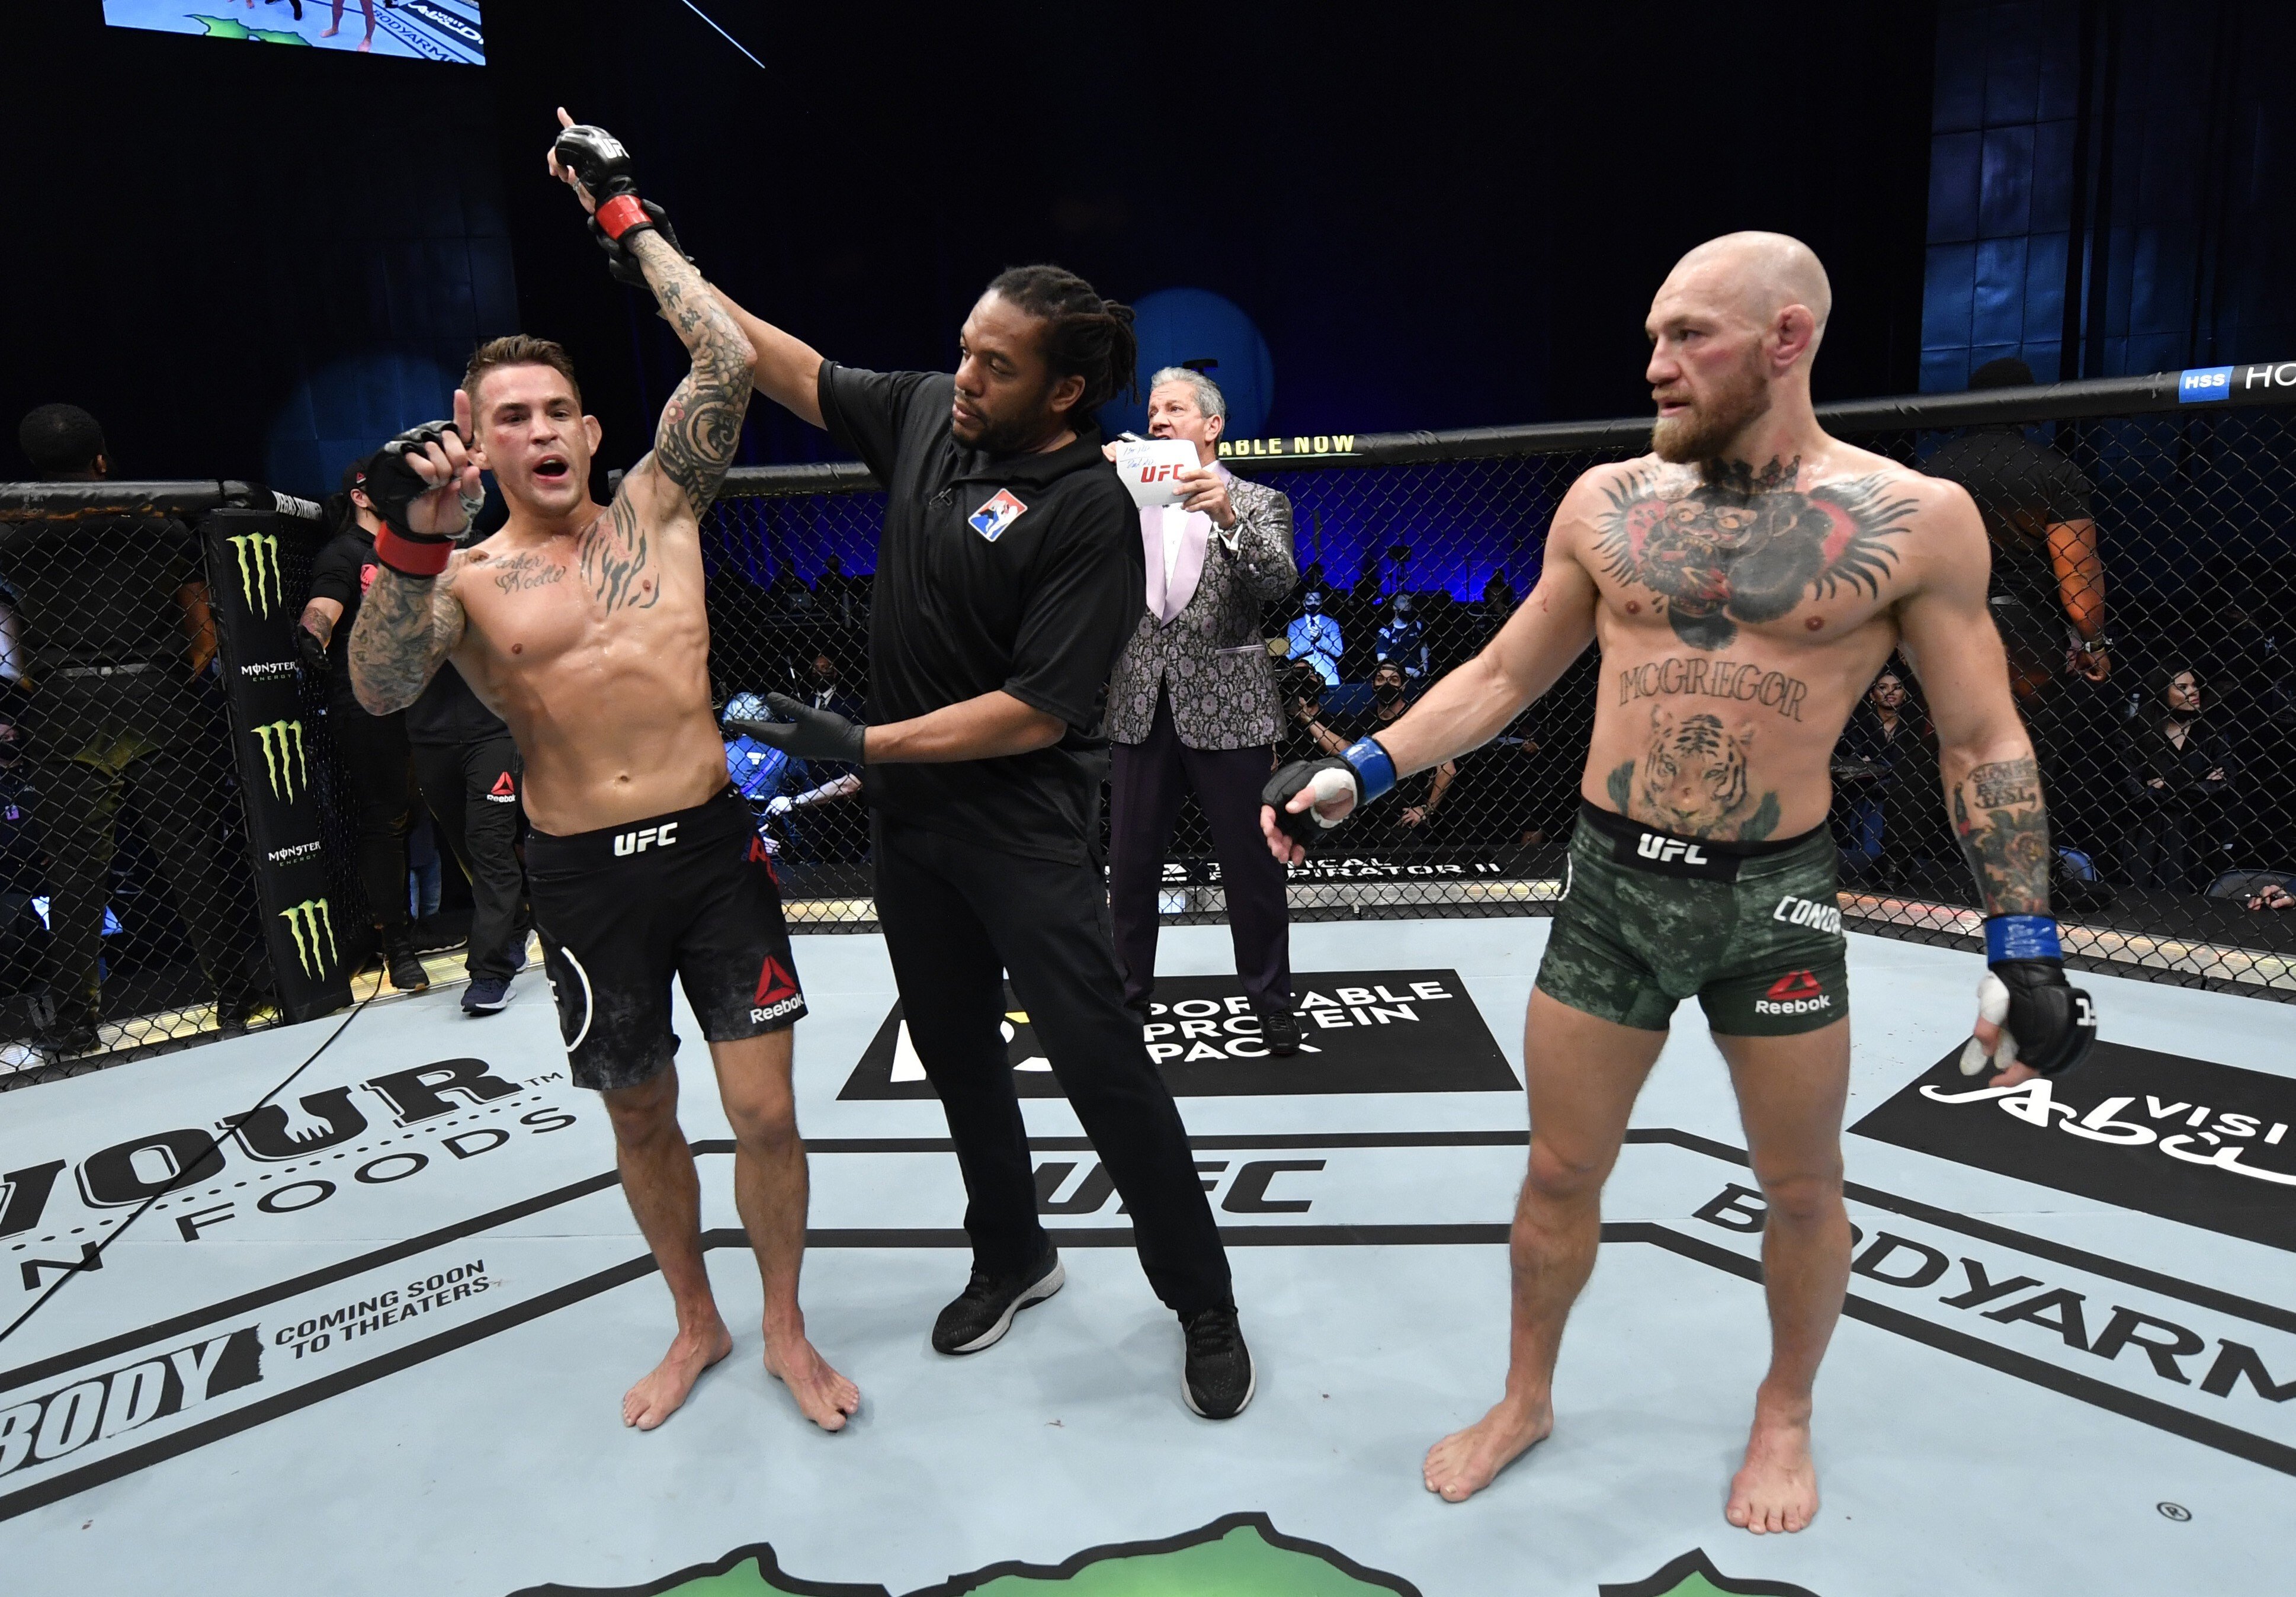 Dustin Poirier celebrates after his knockout victory over Conor McGregor at UFC 257. Photo: Jeff Bottari/Zuffa LLC